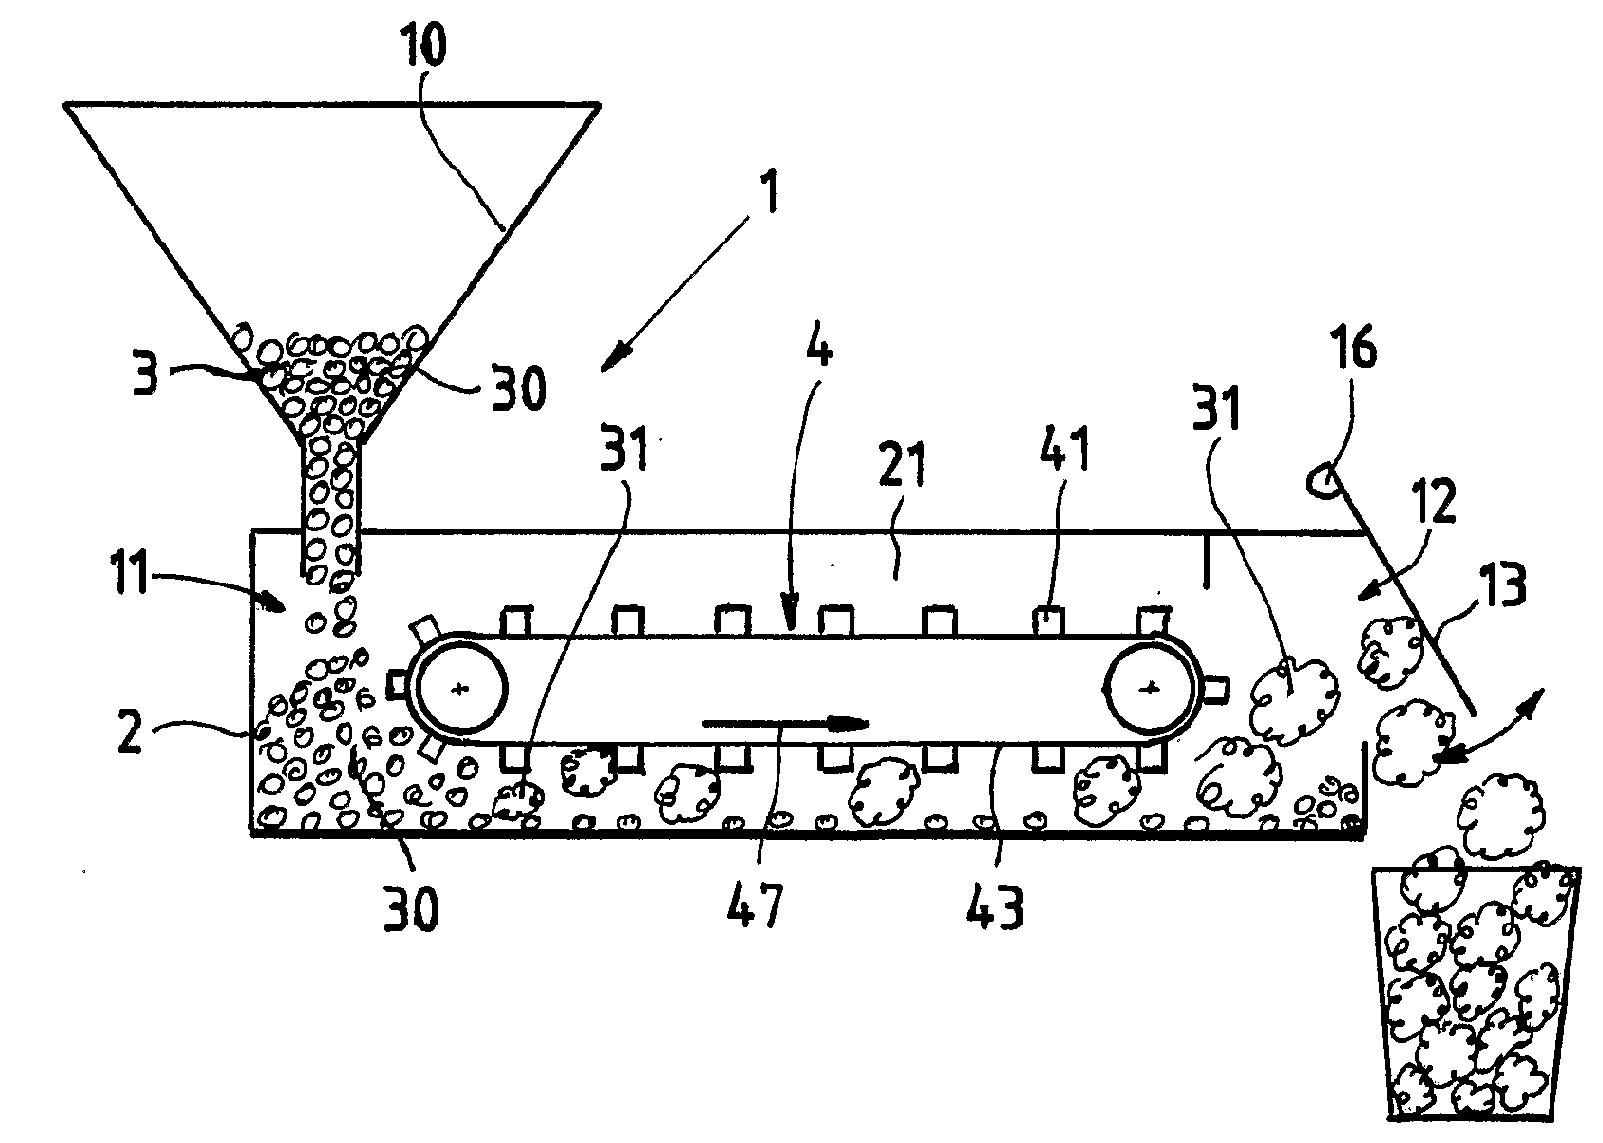 Method and device for producing expanded food